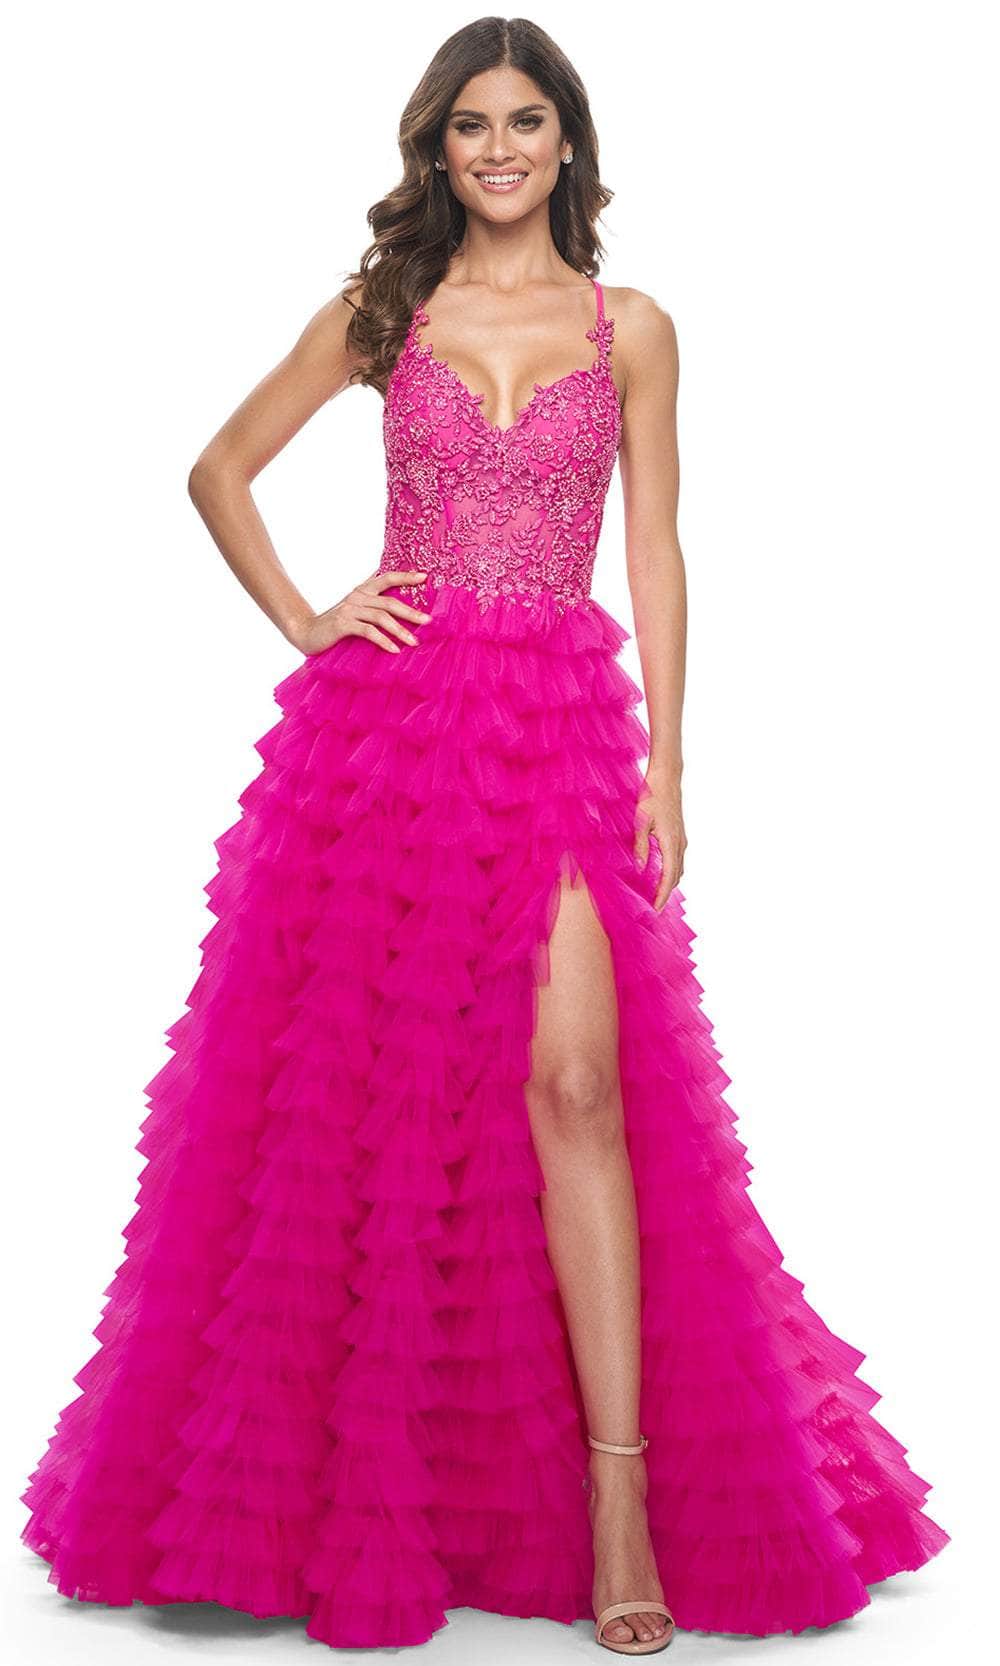 Image of La Femme 32334 - Lace Applique Ruffled A-Line Prom Gown